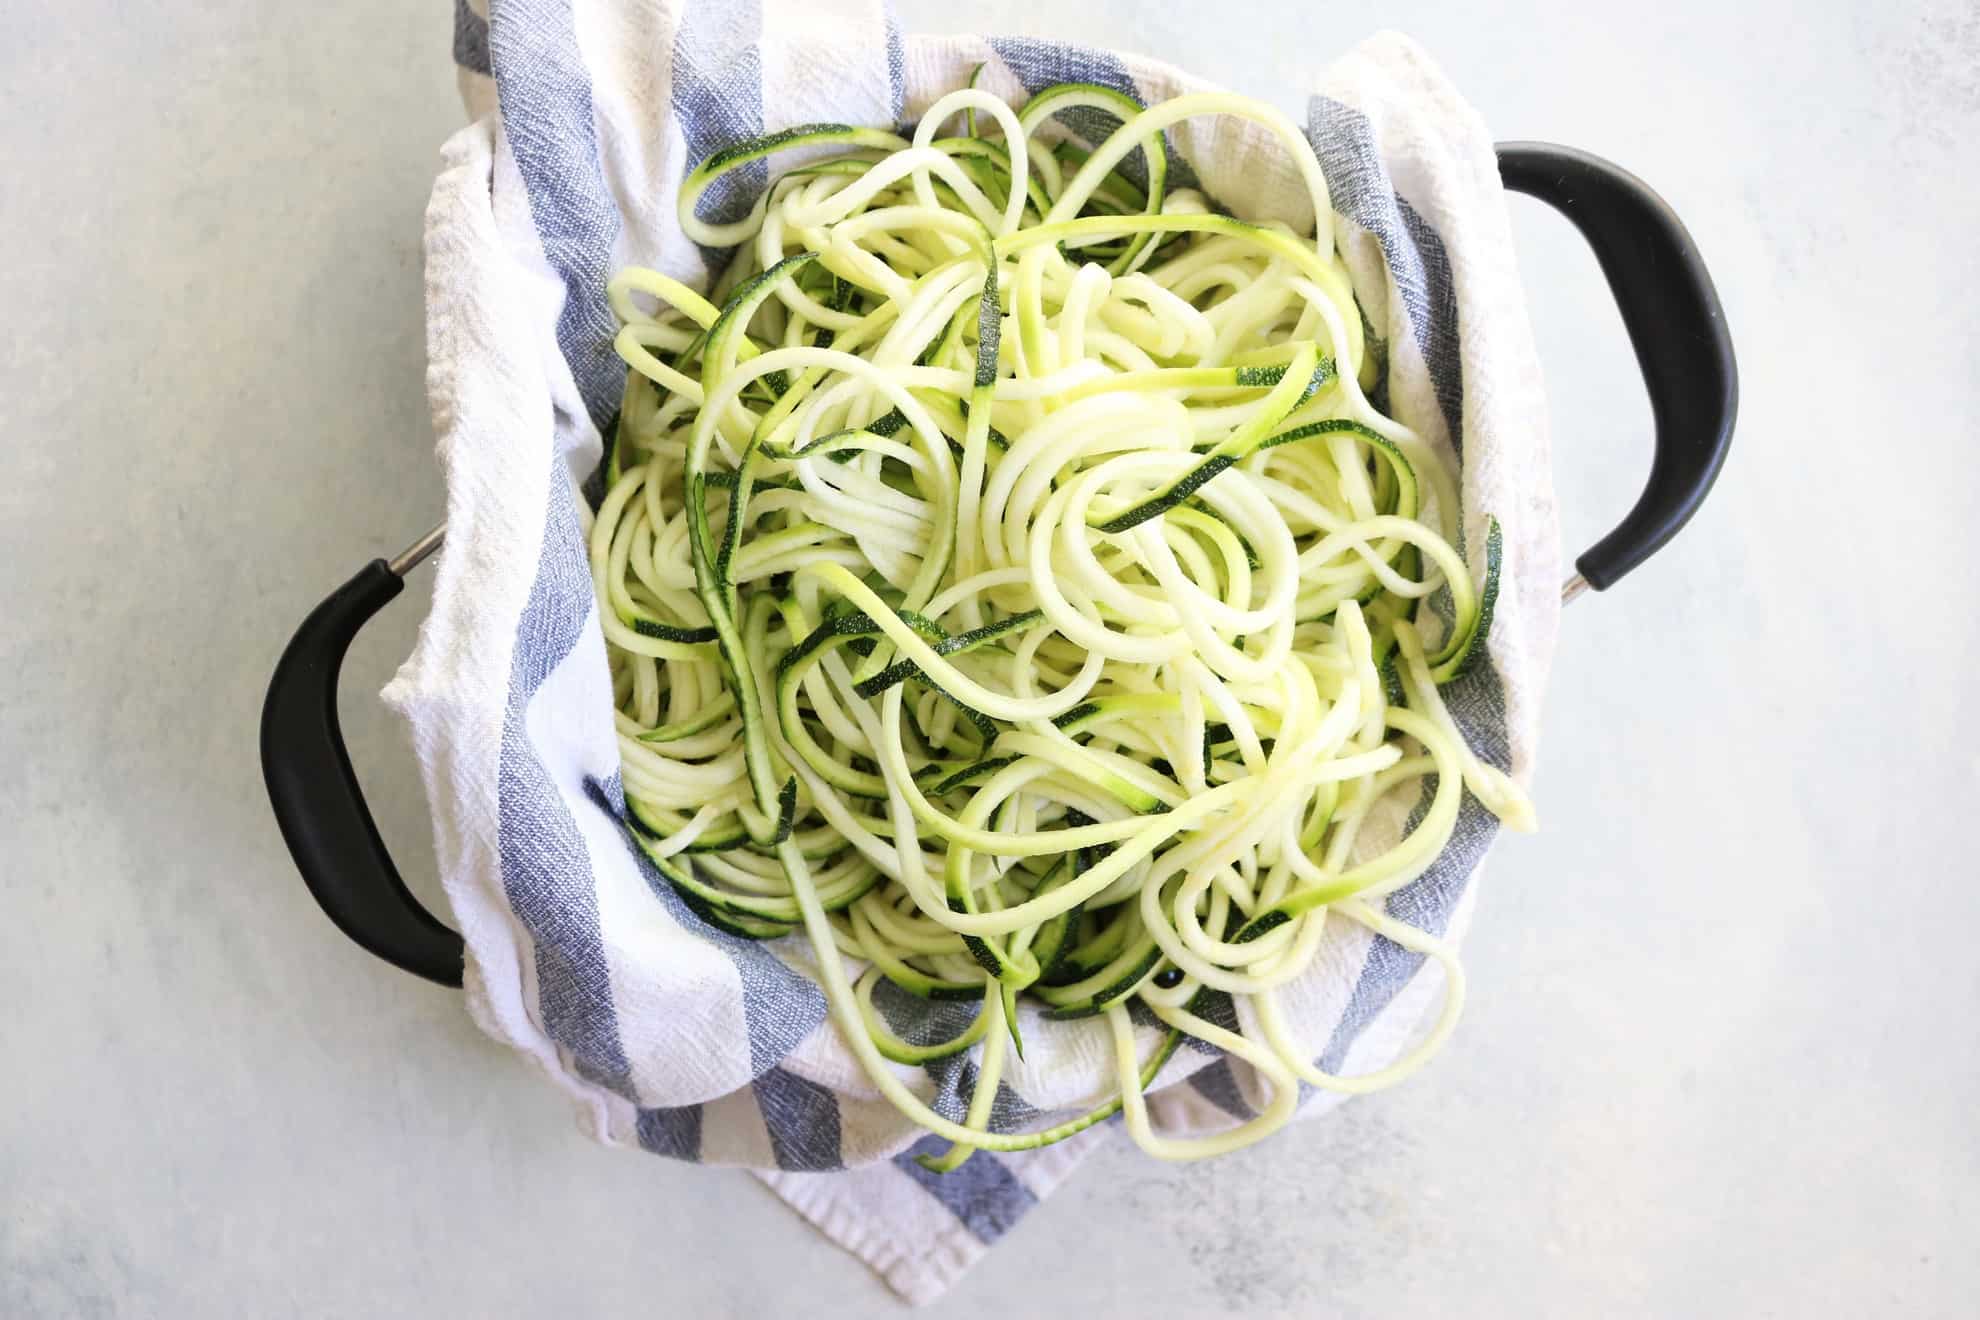 This is an overhead image of zoodles in a blue and white tea towel in a colander. The colander sits on a white counter.